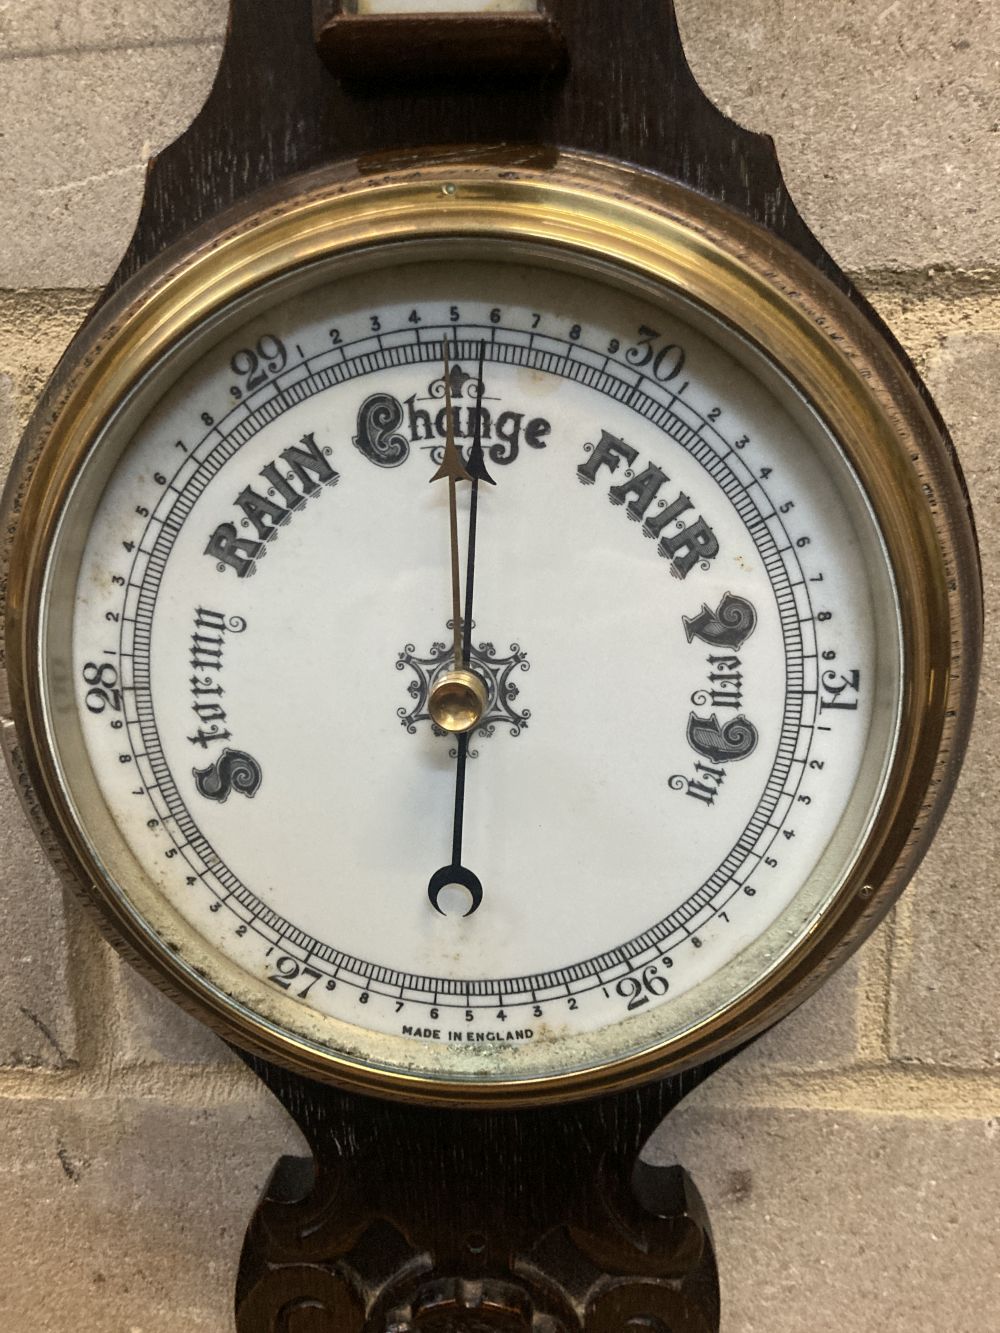 An Edwardian aneroid barometer and thermometer, height 86cm - Image 2 of 3